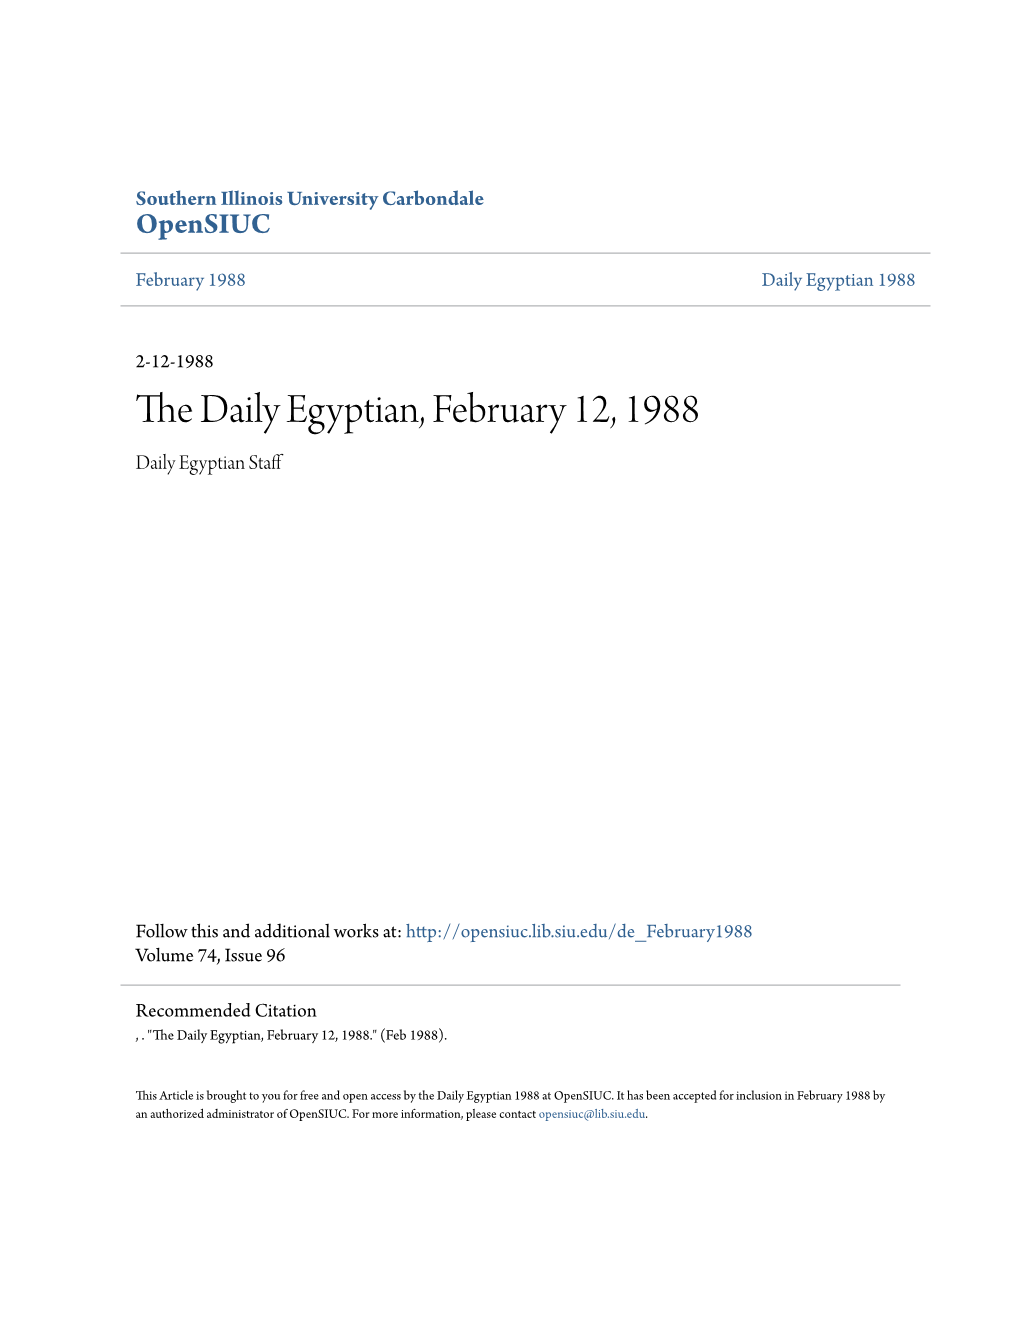 The Daily Egyptian, February 12, 1988